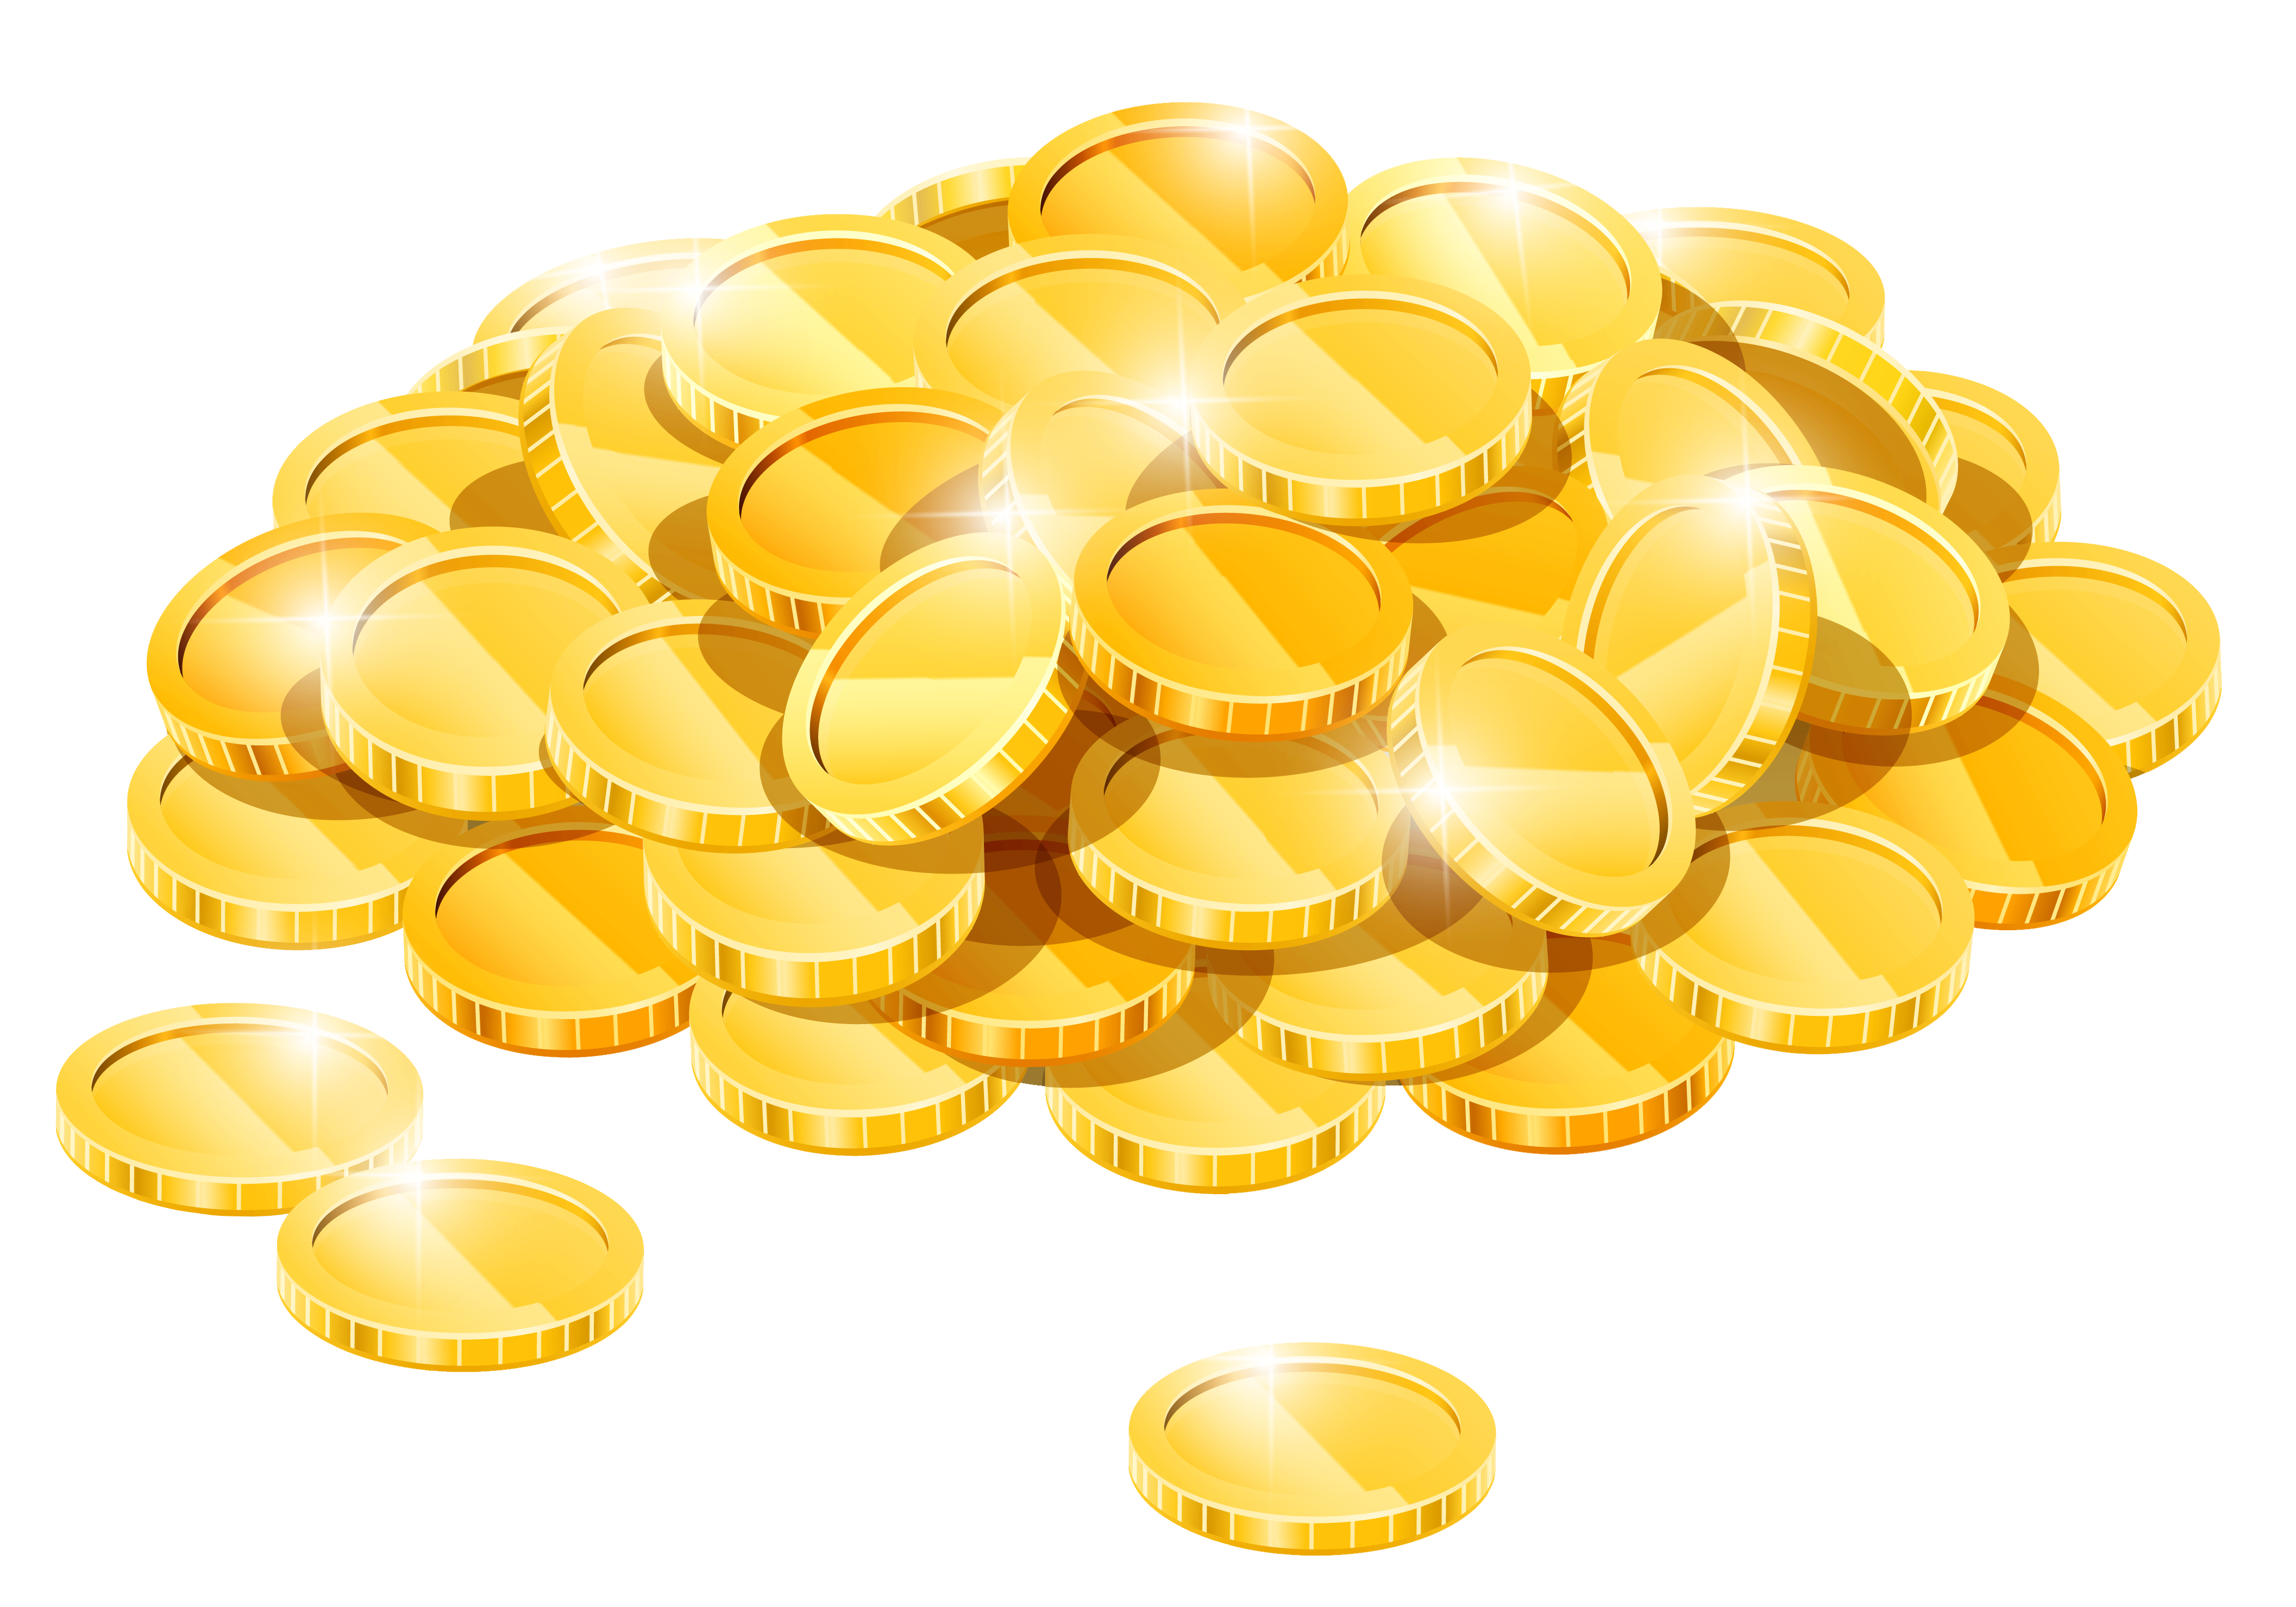 Gold Coins Clipart - Gallery - Gold Coins Clipart